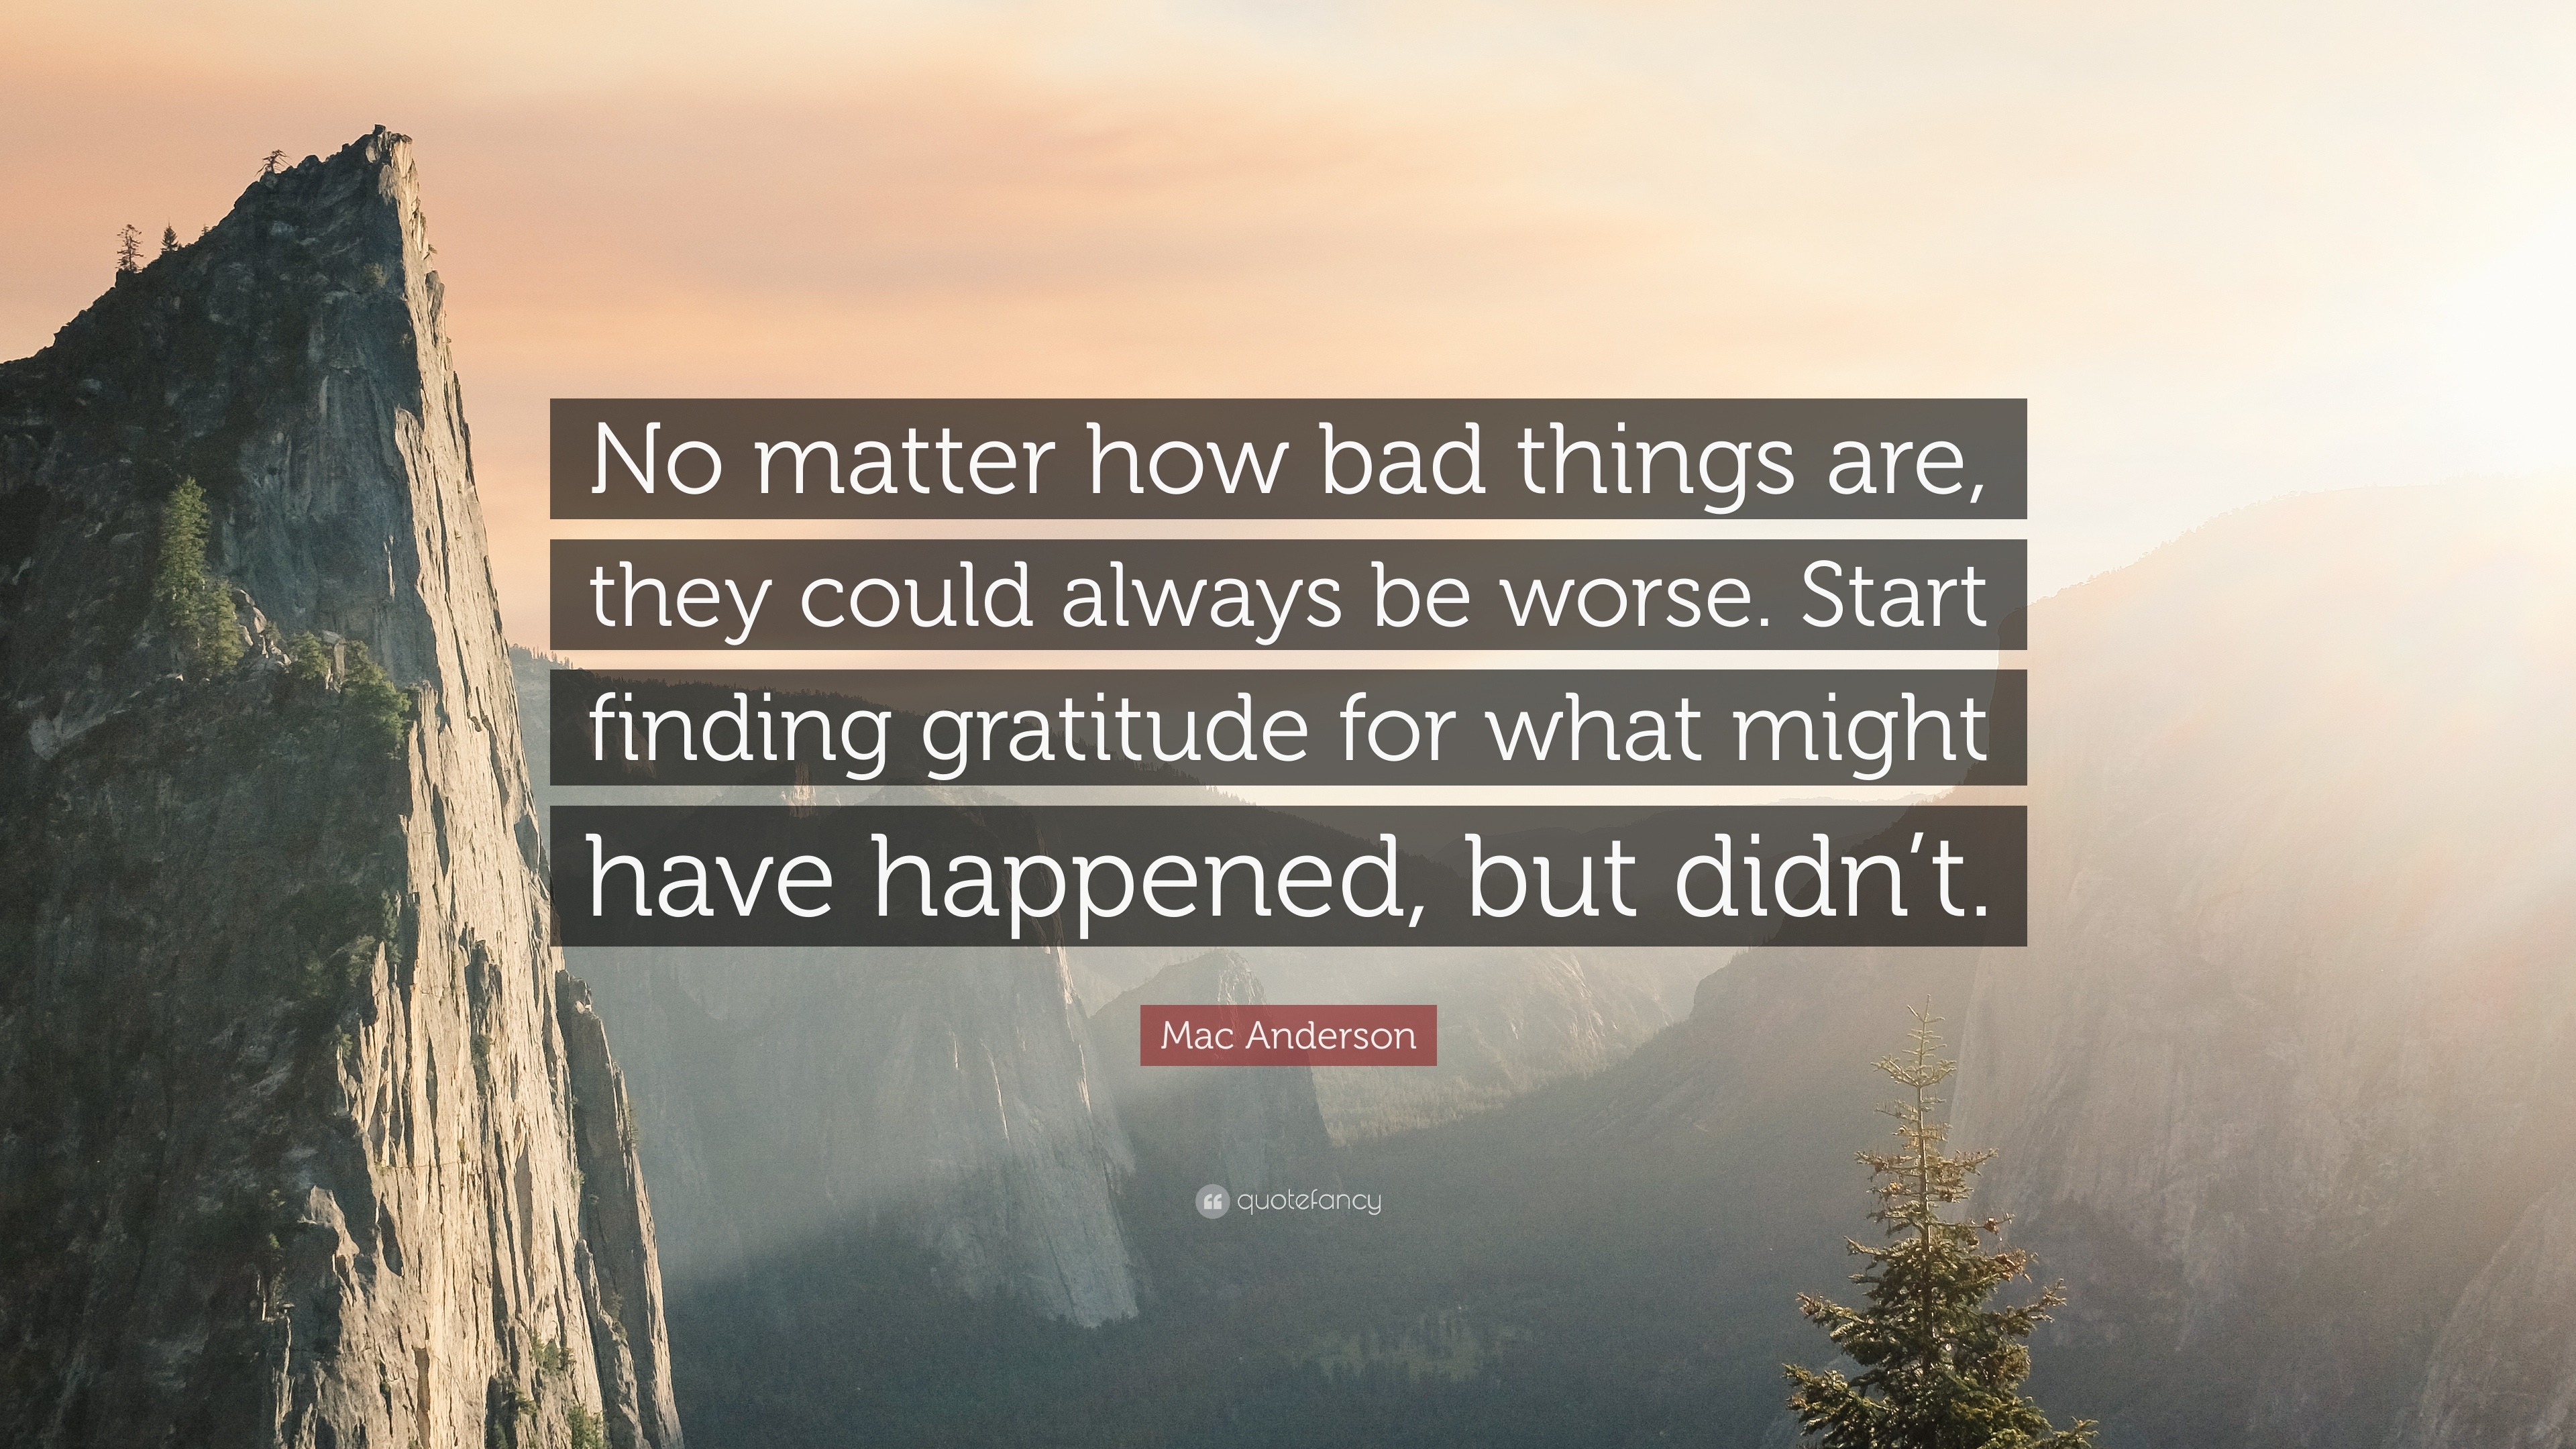 Mac Anderson Quote: “No matter how bad things are, they could